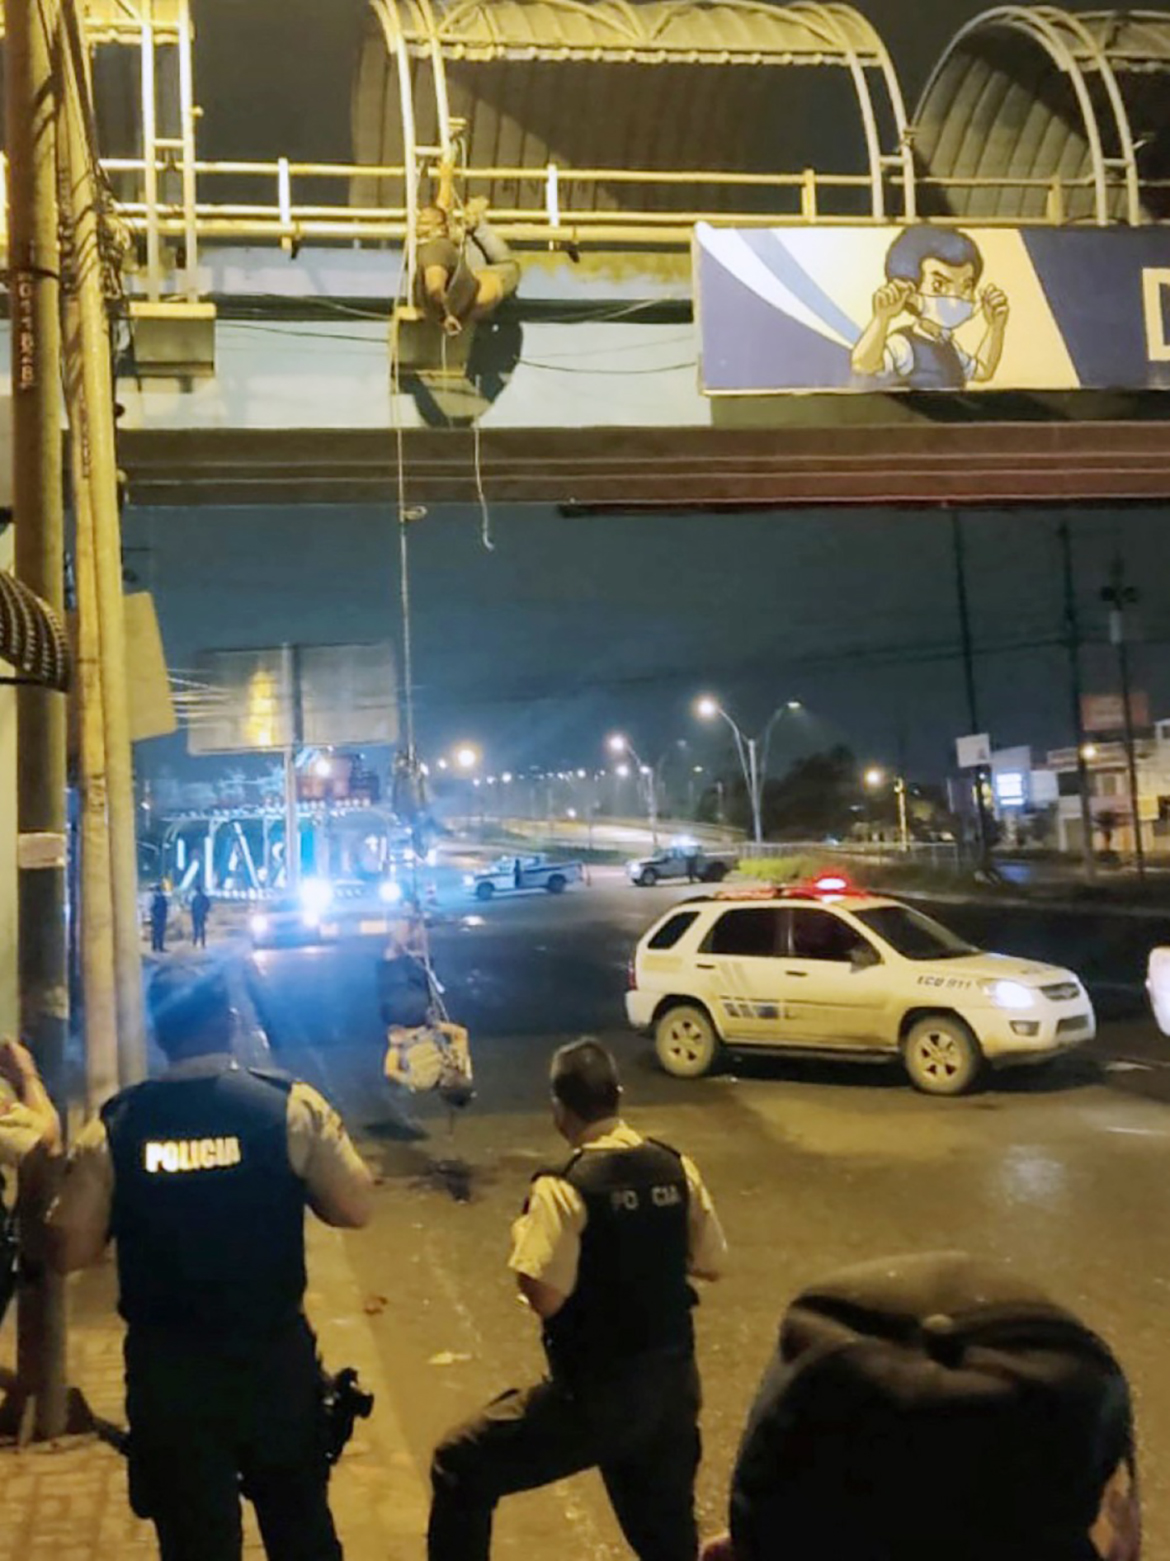 DURAN: Police officers look at two bodies hanging from a pedestrian bridge in Duran, Guayas province, Ecuador. The brutality of drug traffickers is cornering Ecuador after being safe from its violence. - AFP